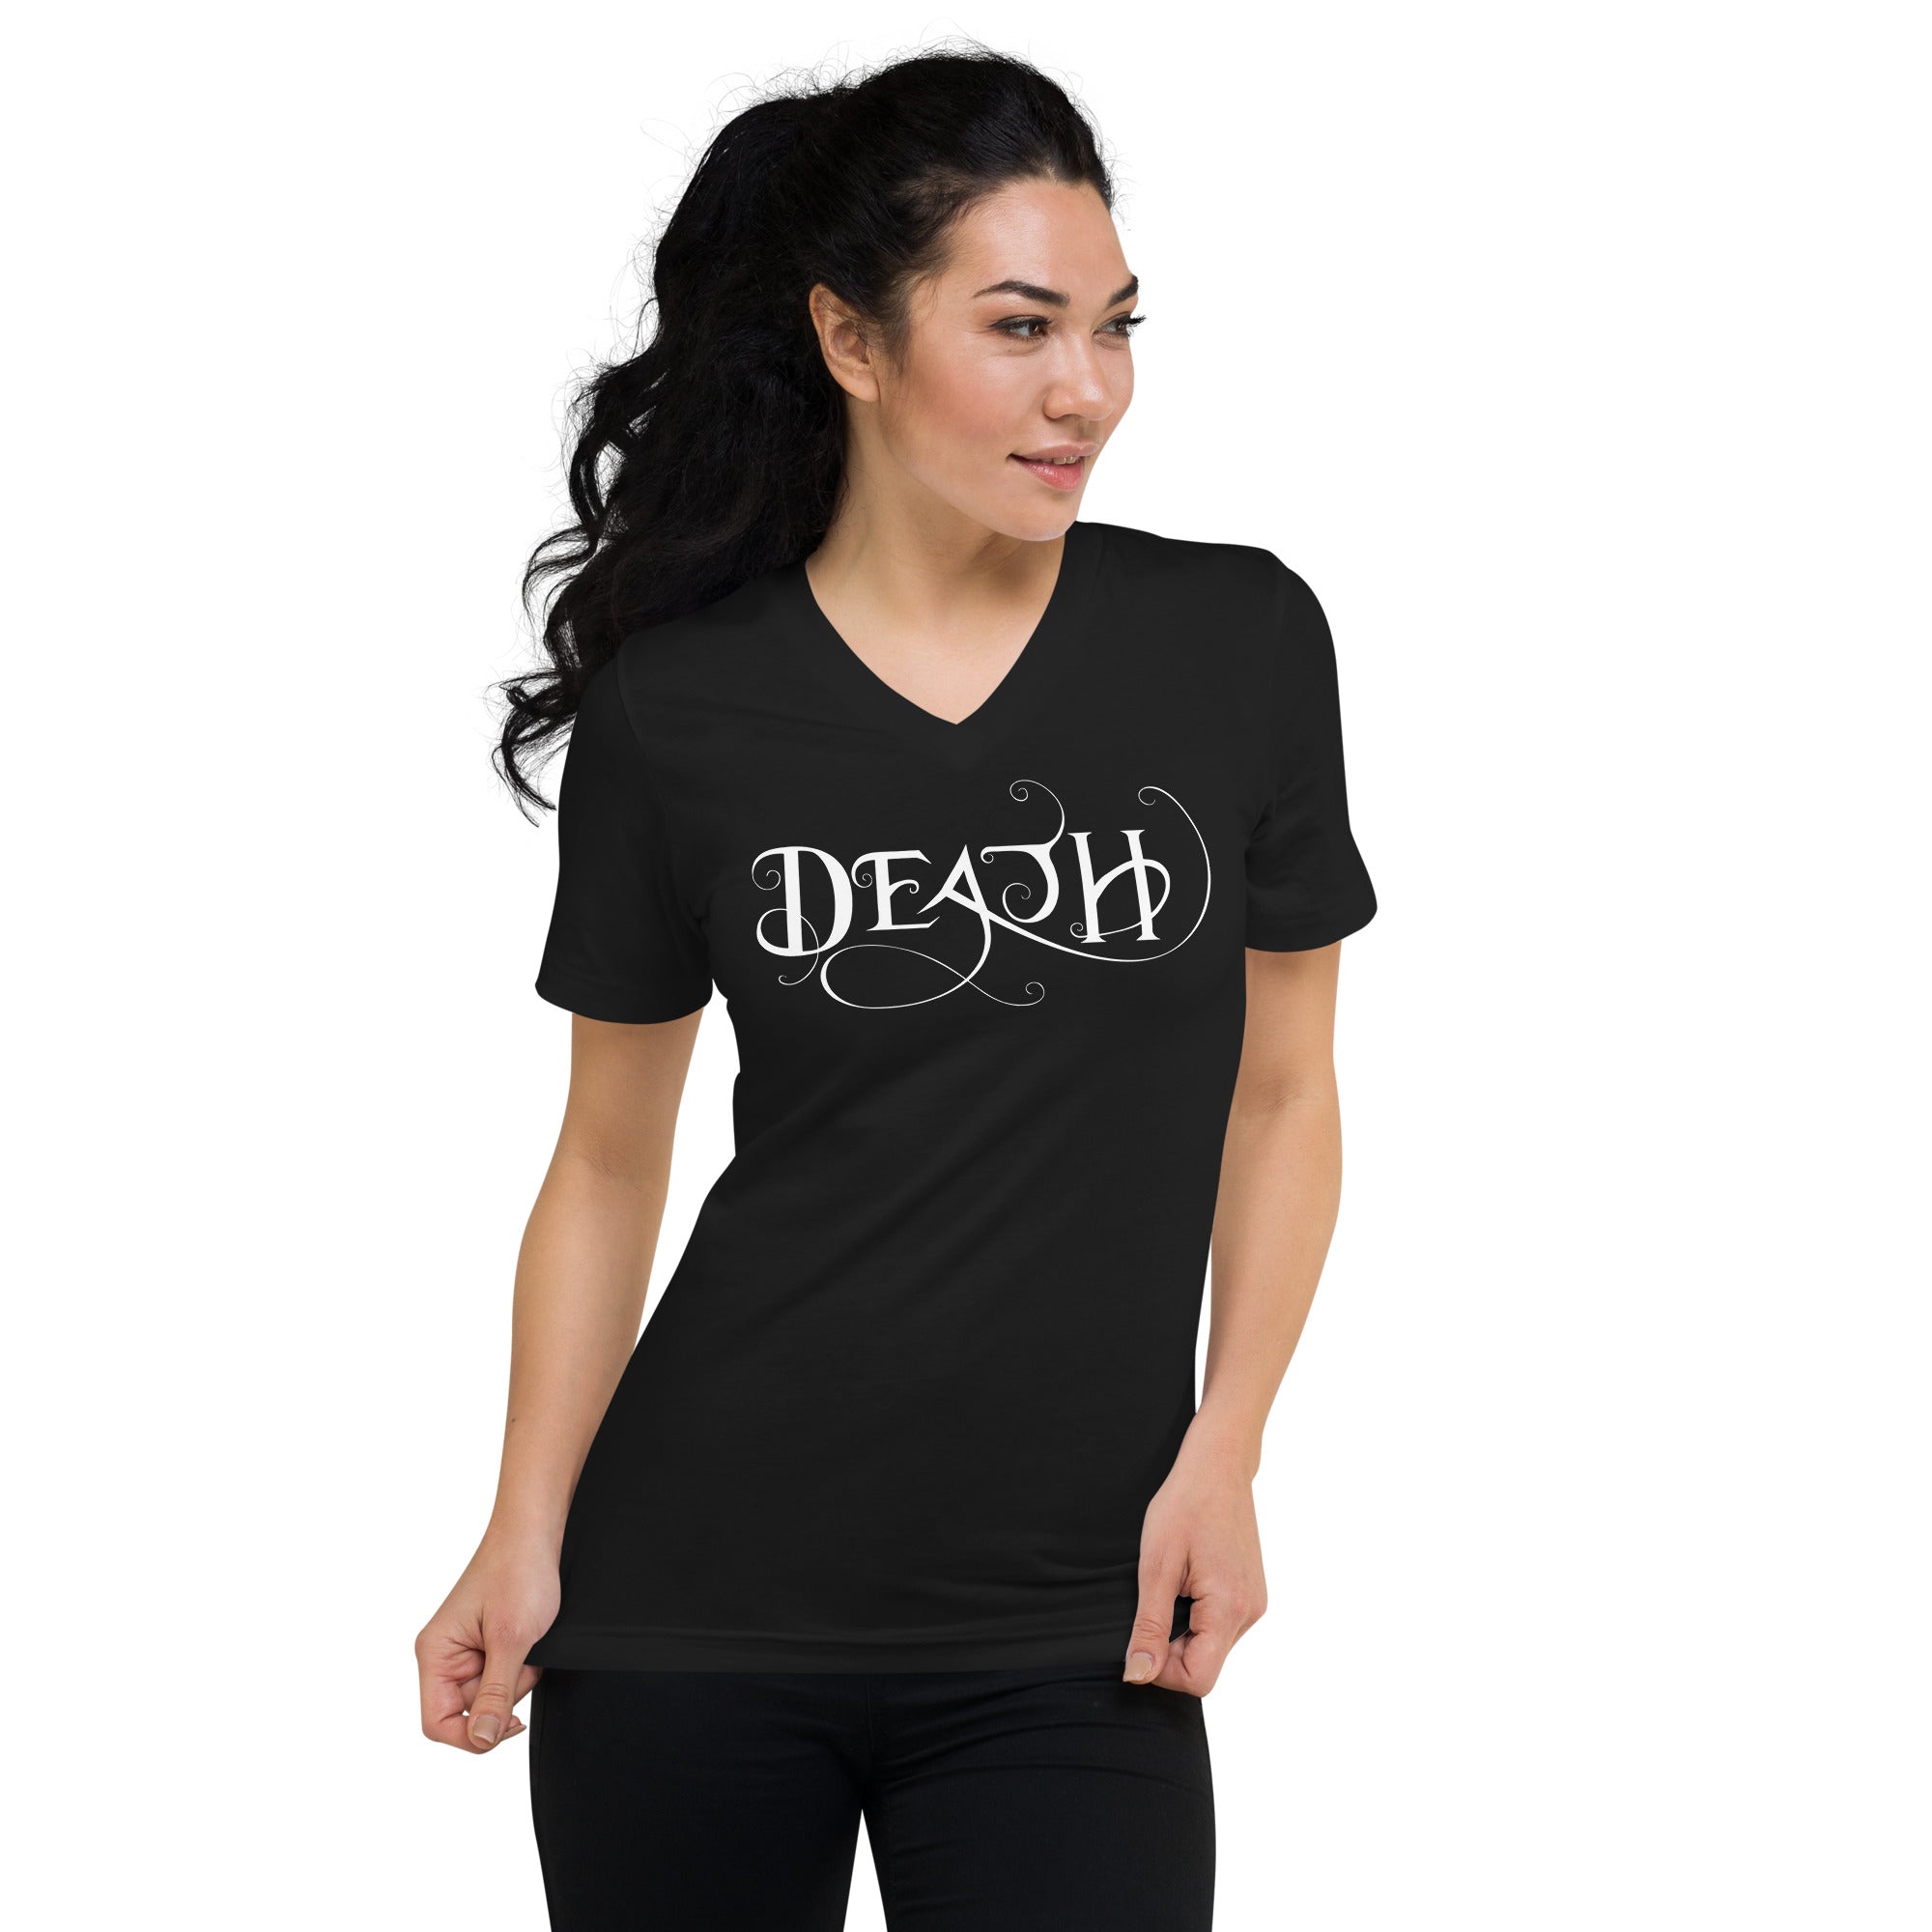 Death - The Grim Reaper Gothic Deathrock Style Women’s Short Sleeve V-Neck T-Shirt - Edge of Life Designs